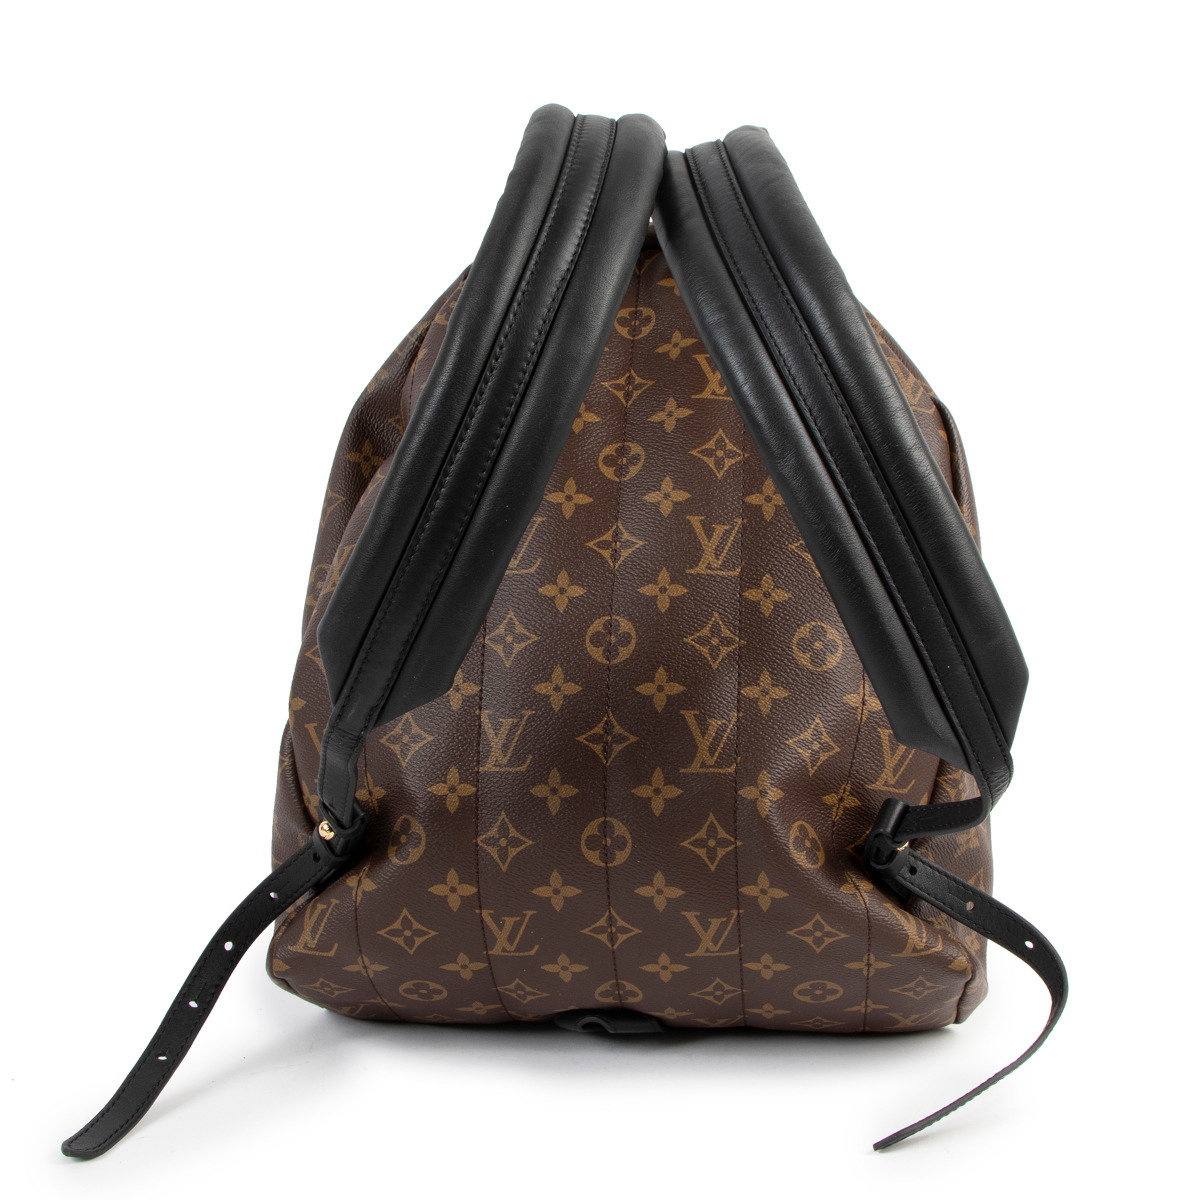 Palm springs cloth backpack Louis Vuitton Black in Cloth - 25251246